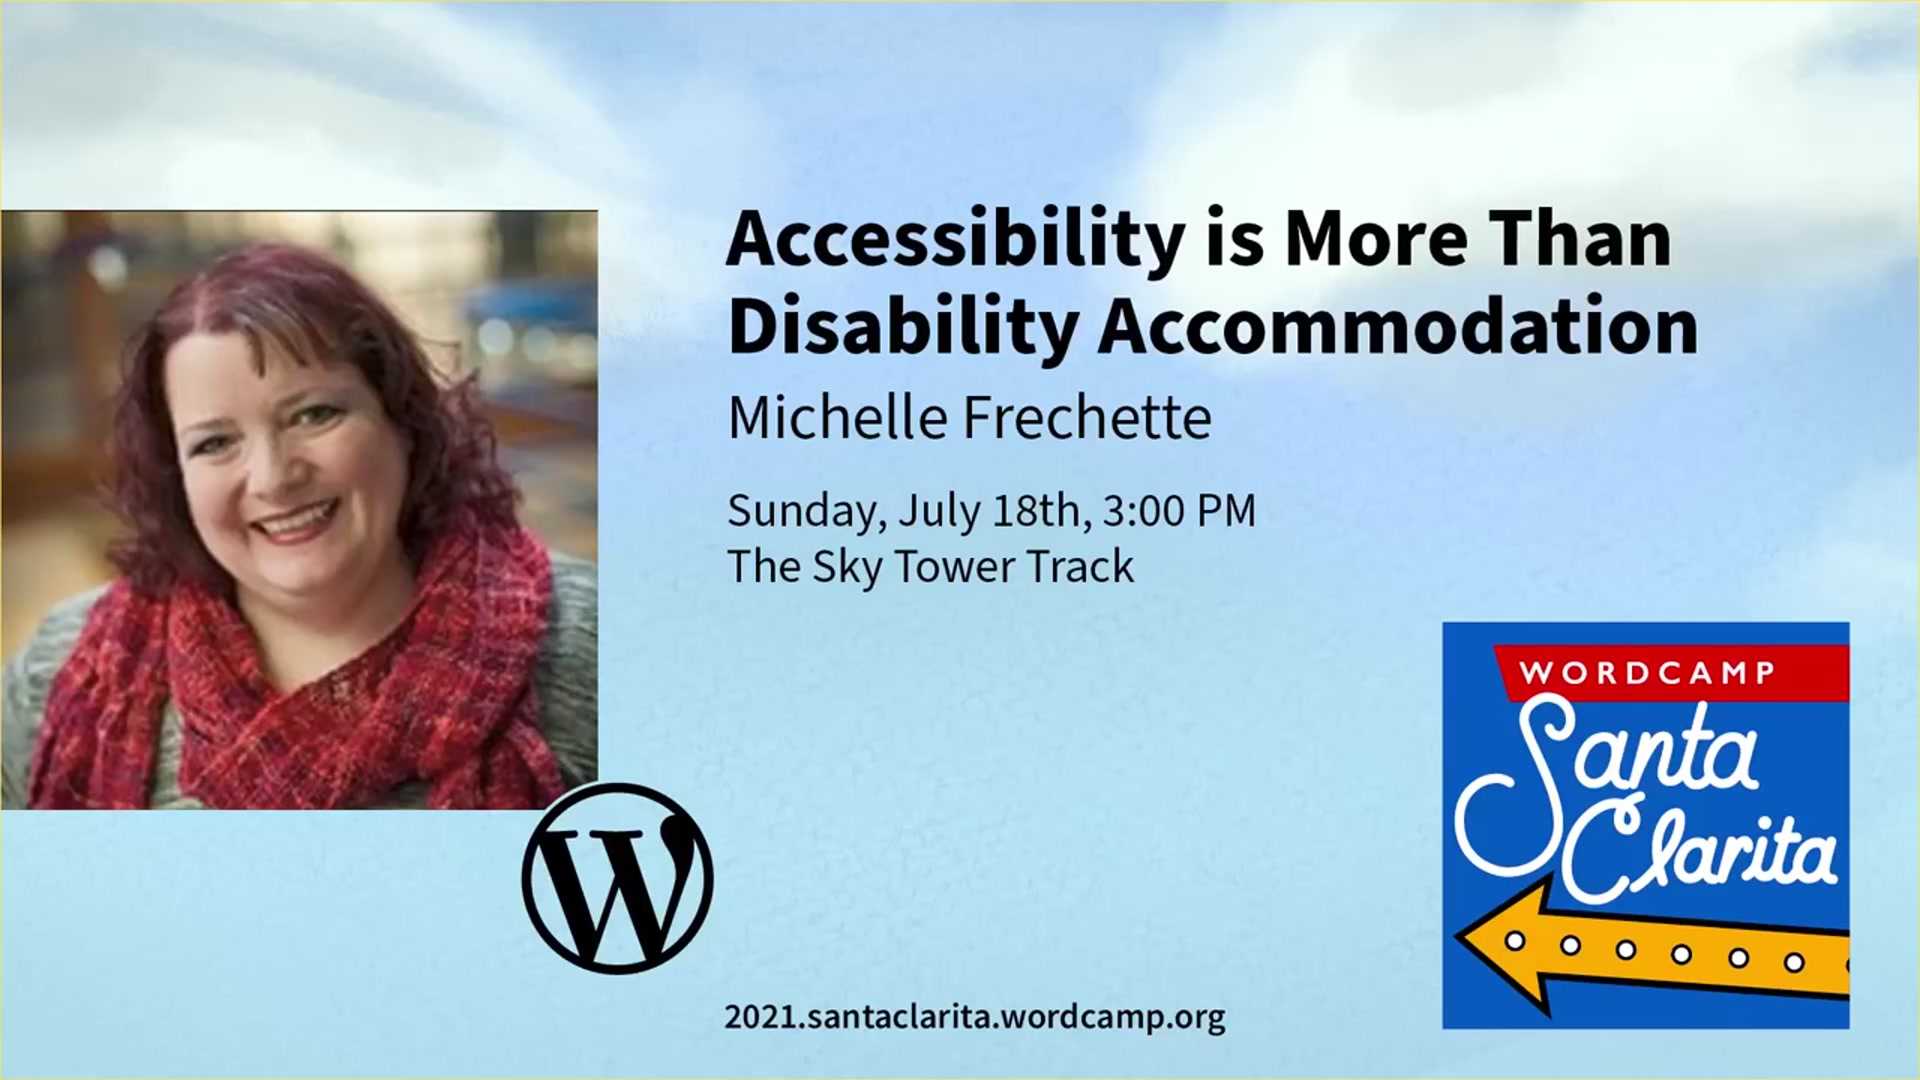 Michelle Frechette: Accessibility is More Than Disability Accommodation